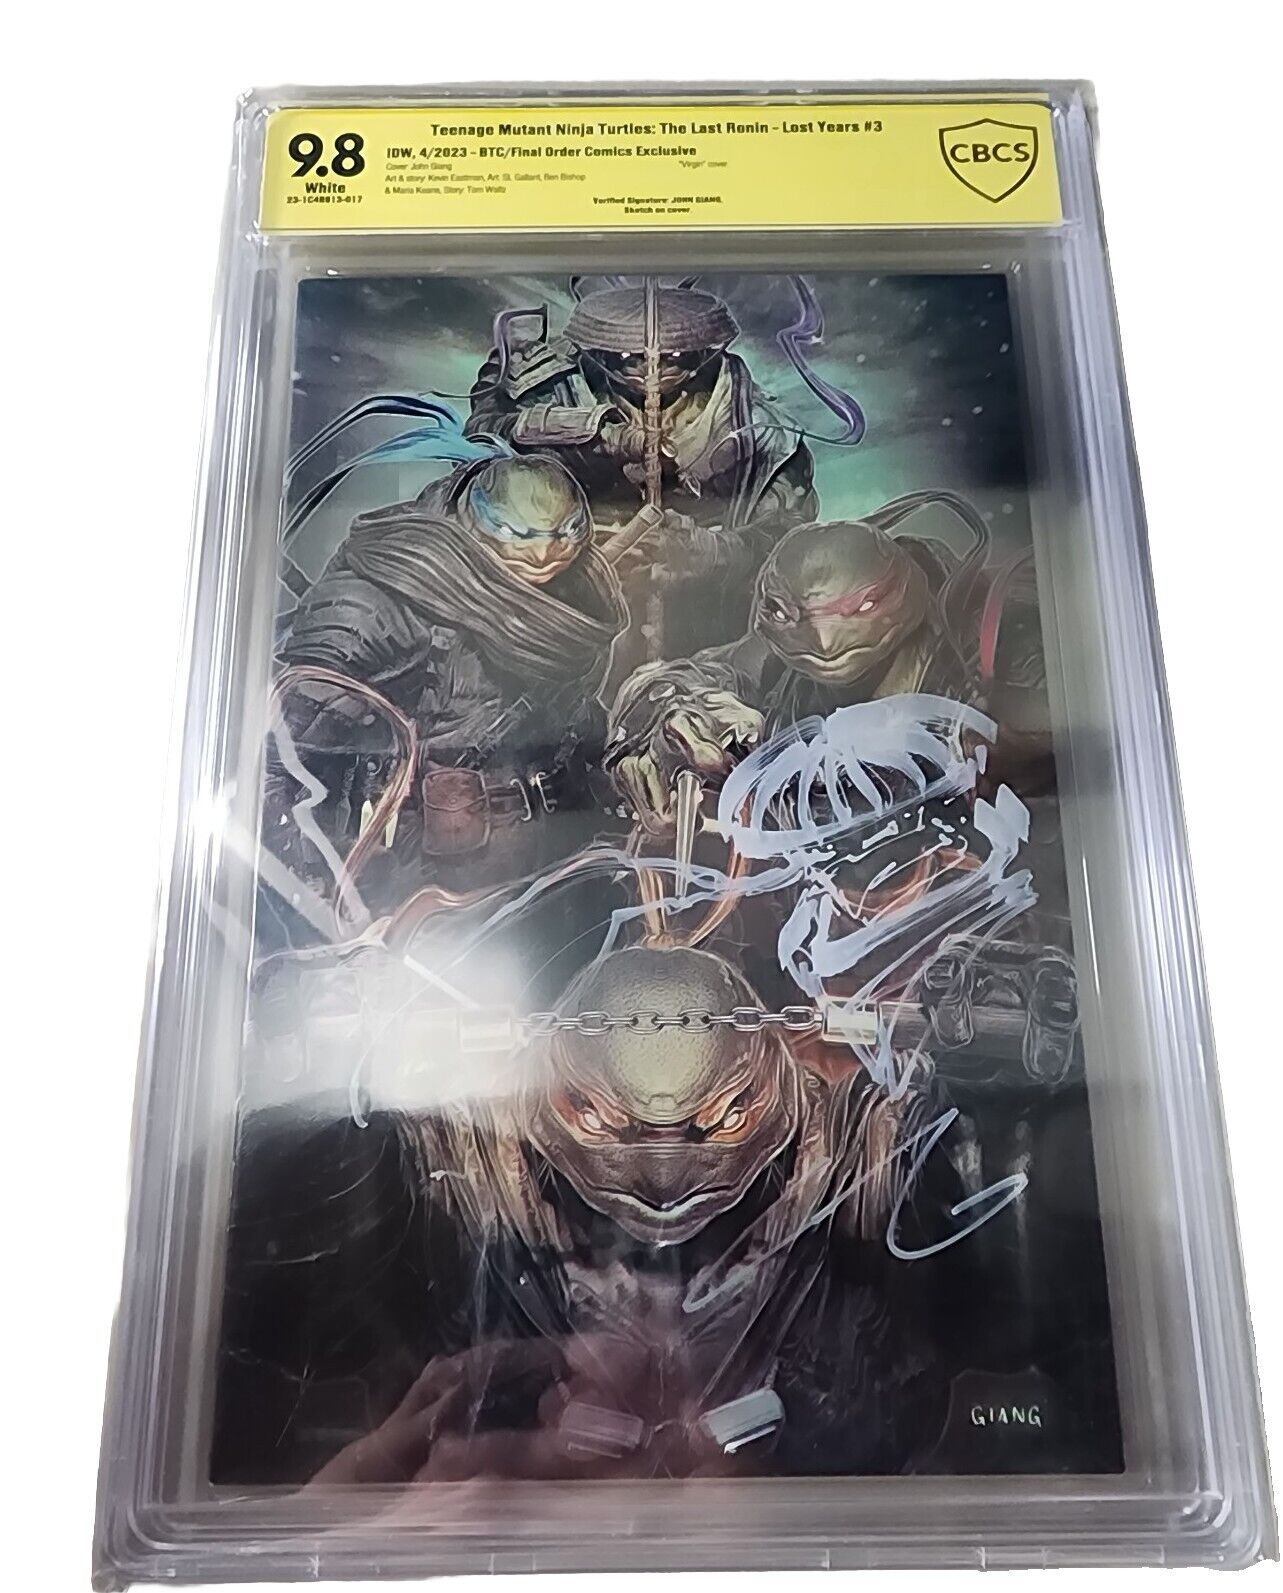 TMNT Last Ronin Lost Years #3 Giang  SIGNED W Ronin SKETCH CBCS 9.8 